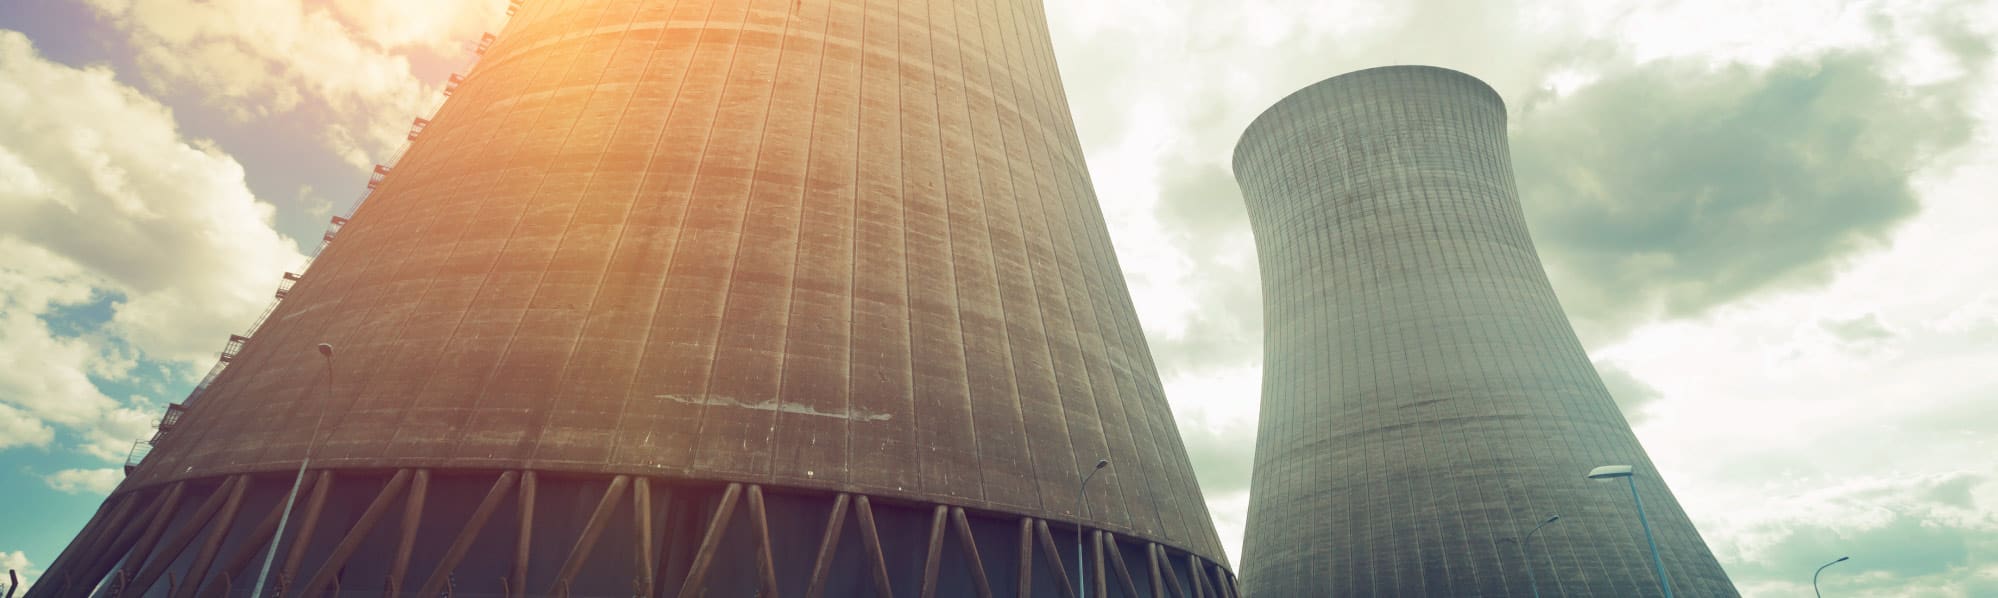 A picture of 2 cooling tower at a nuclear powerplant, viewed from below